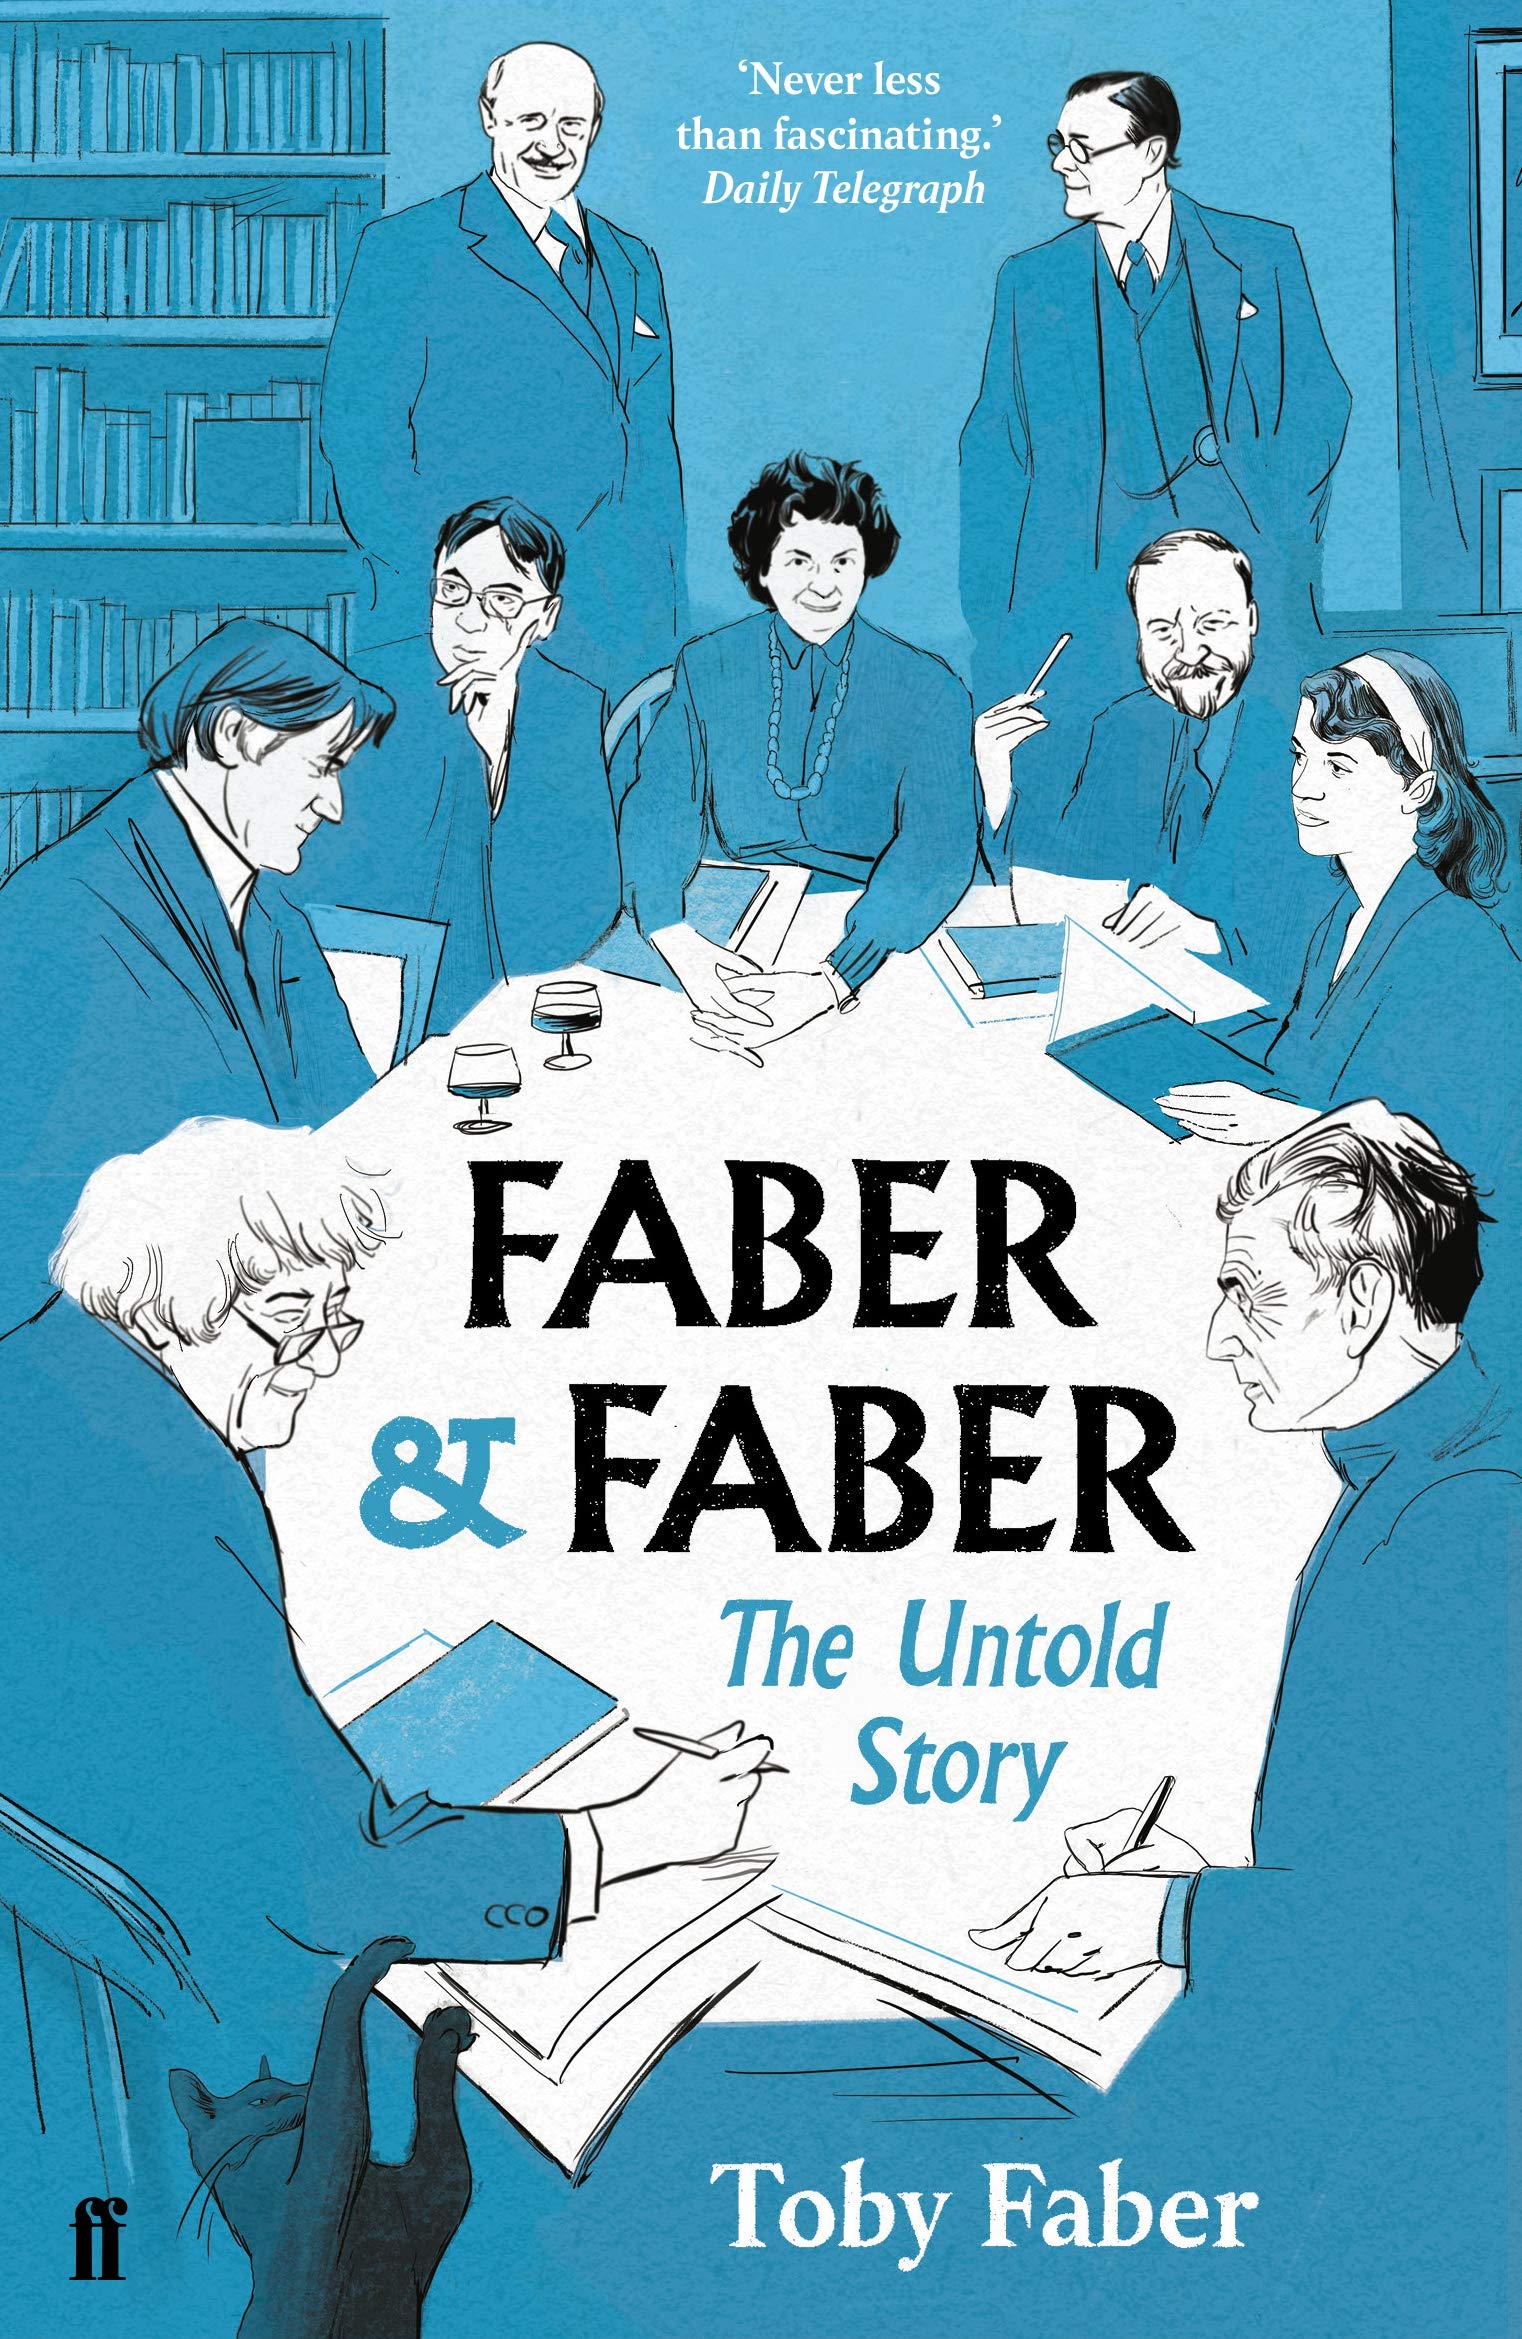 Faber & Faber. The Untold Story